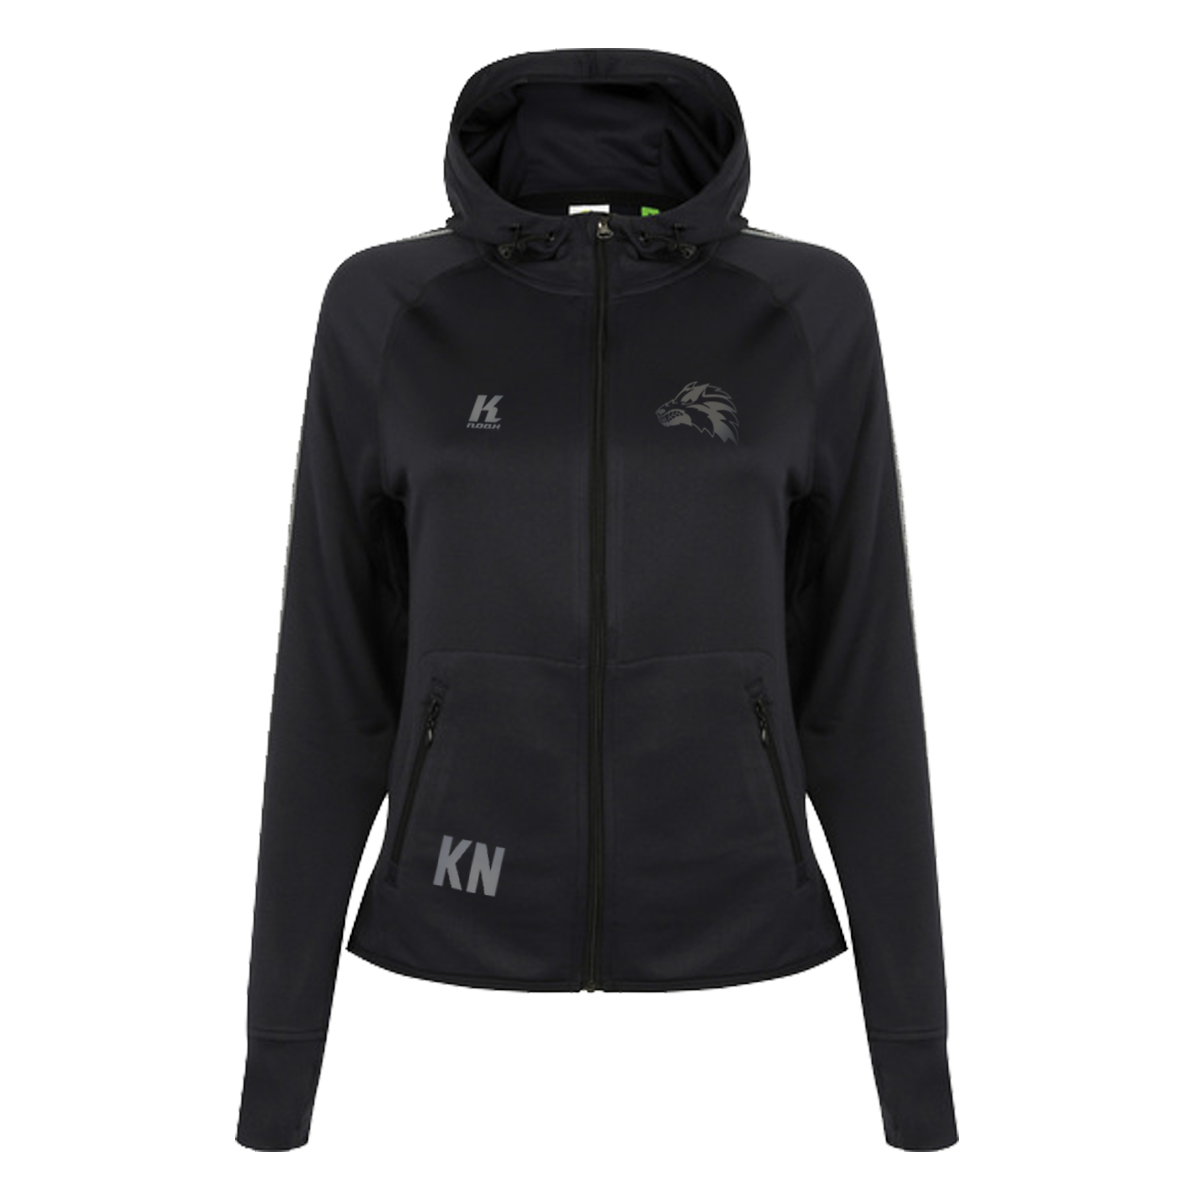 Wolves "Blackline" Womens Zip Hoodie TL551 with Initials/Playernumber